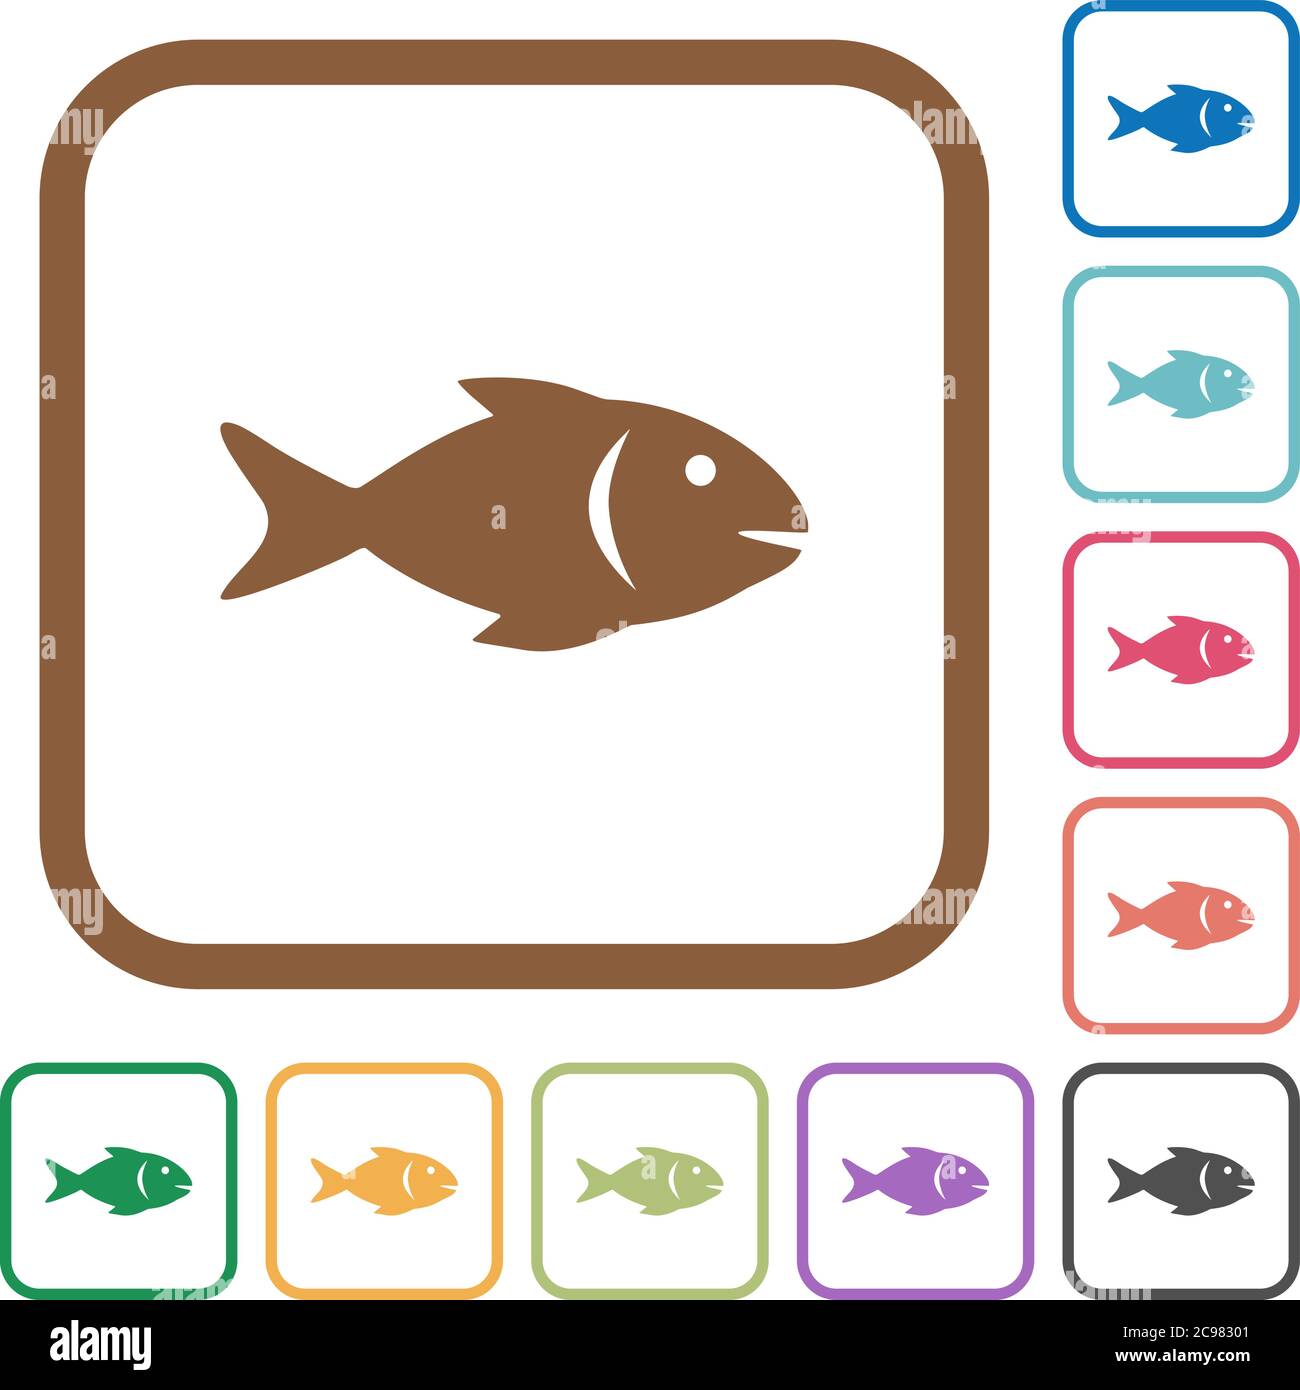 Fish simple icons in color rounded square frames on white background Stock Vector